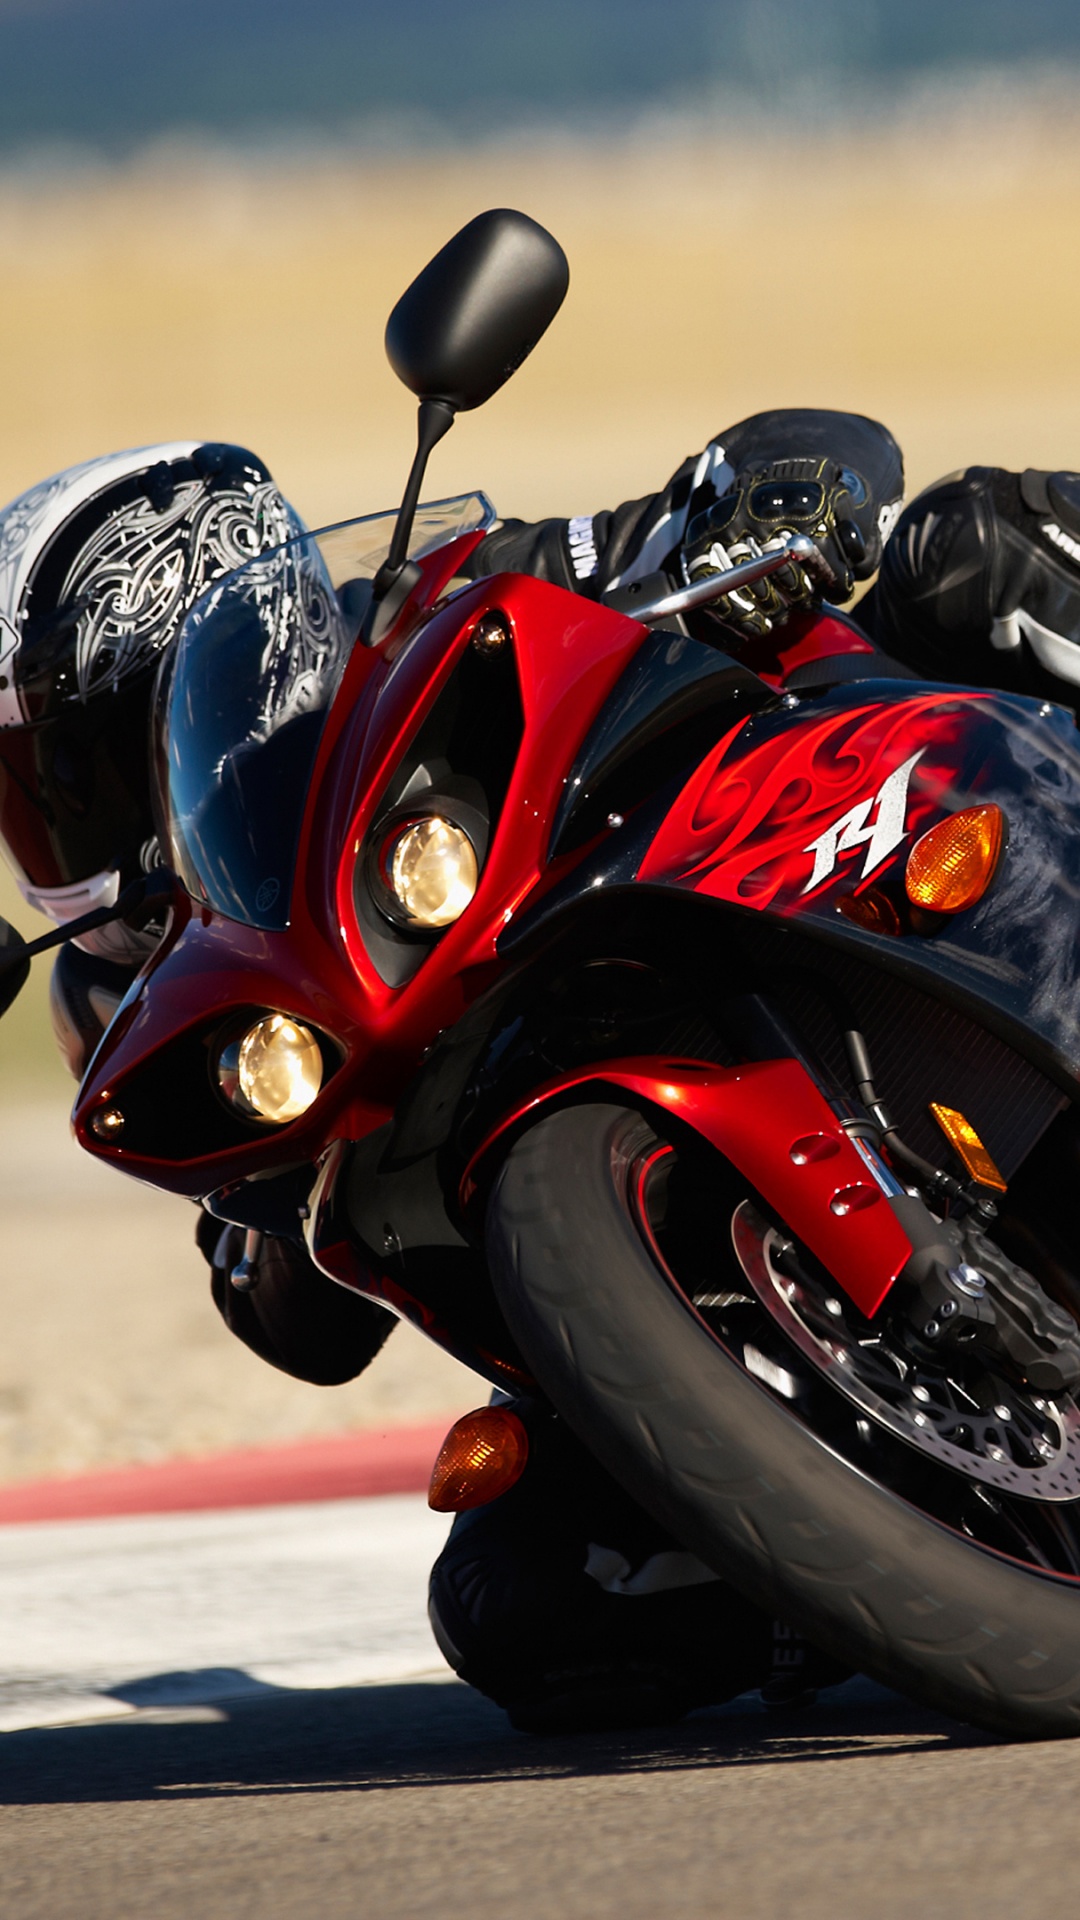 Red and Black Sports Bike on Road During Daytime. Wallpaper in 1080x1920 Resolution